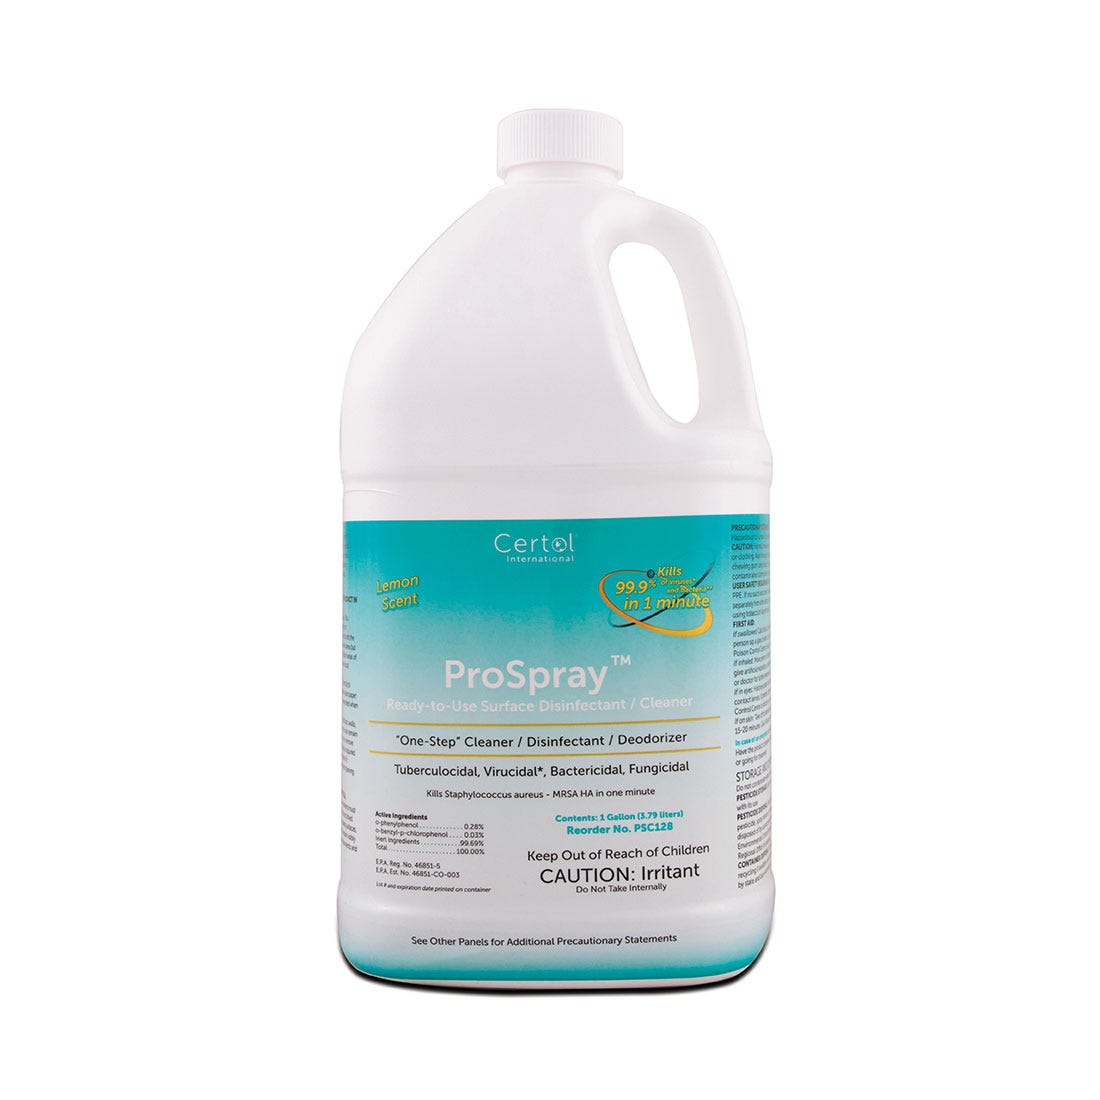 ProSpray Ready-to-Use Surface Disinfectant Cleaner, 1 Gallon